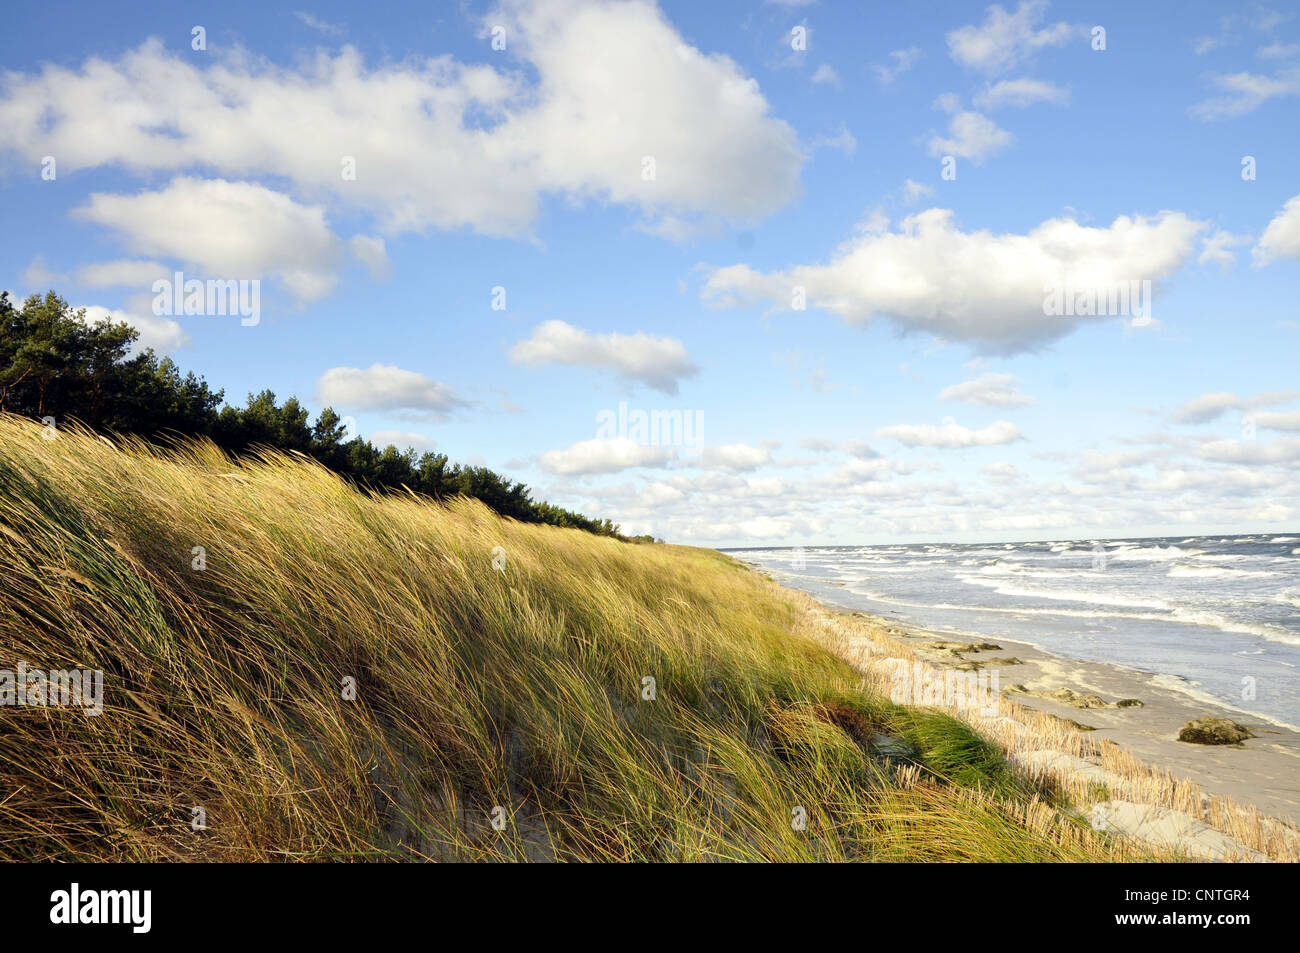 view over a dune at the open sea, Germany, Mecklenburg Vorpommern, Western Pomerania Lagoon Area National Park Stock Photo